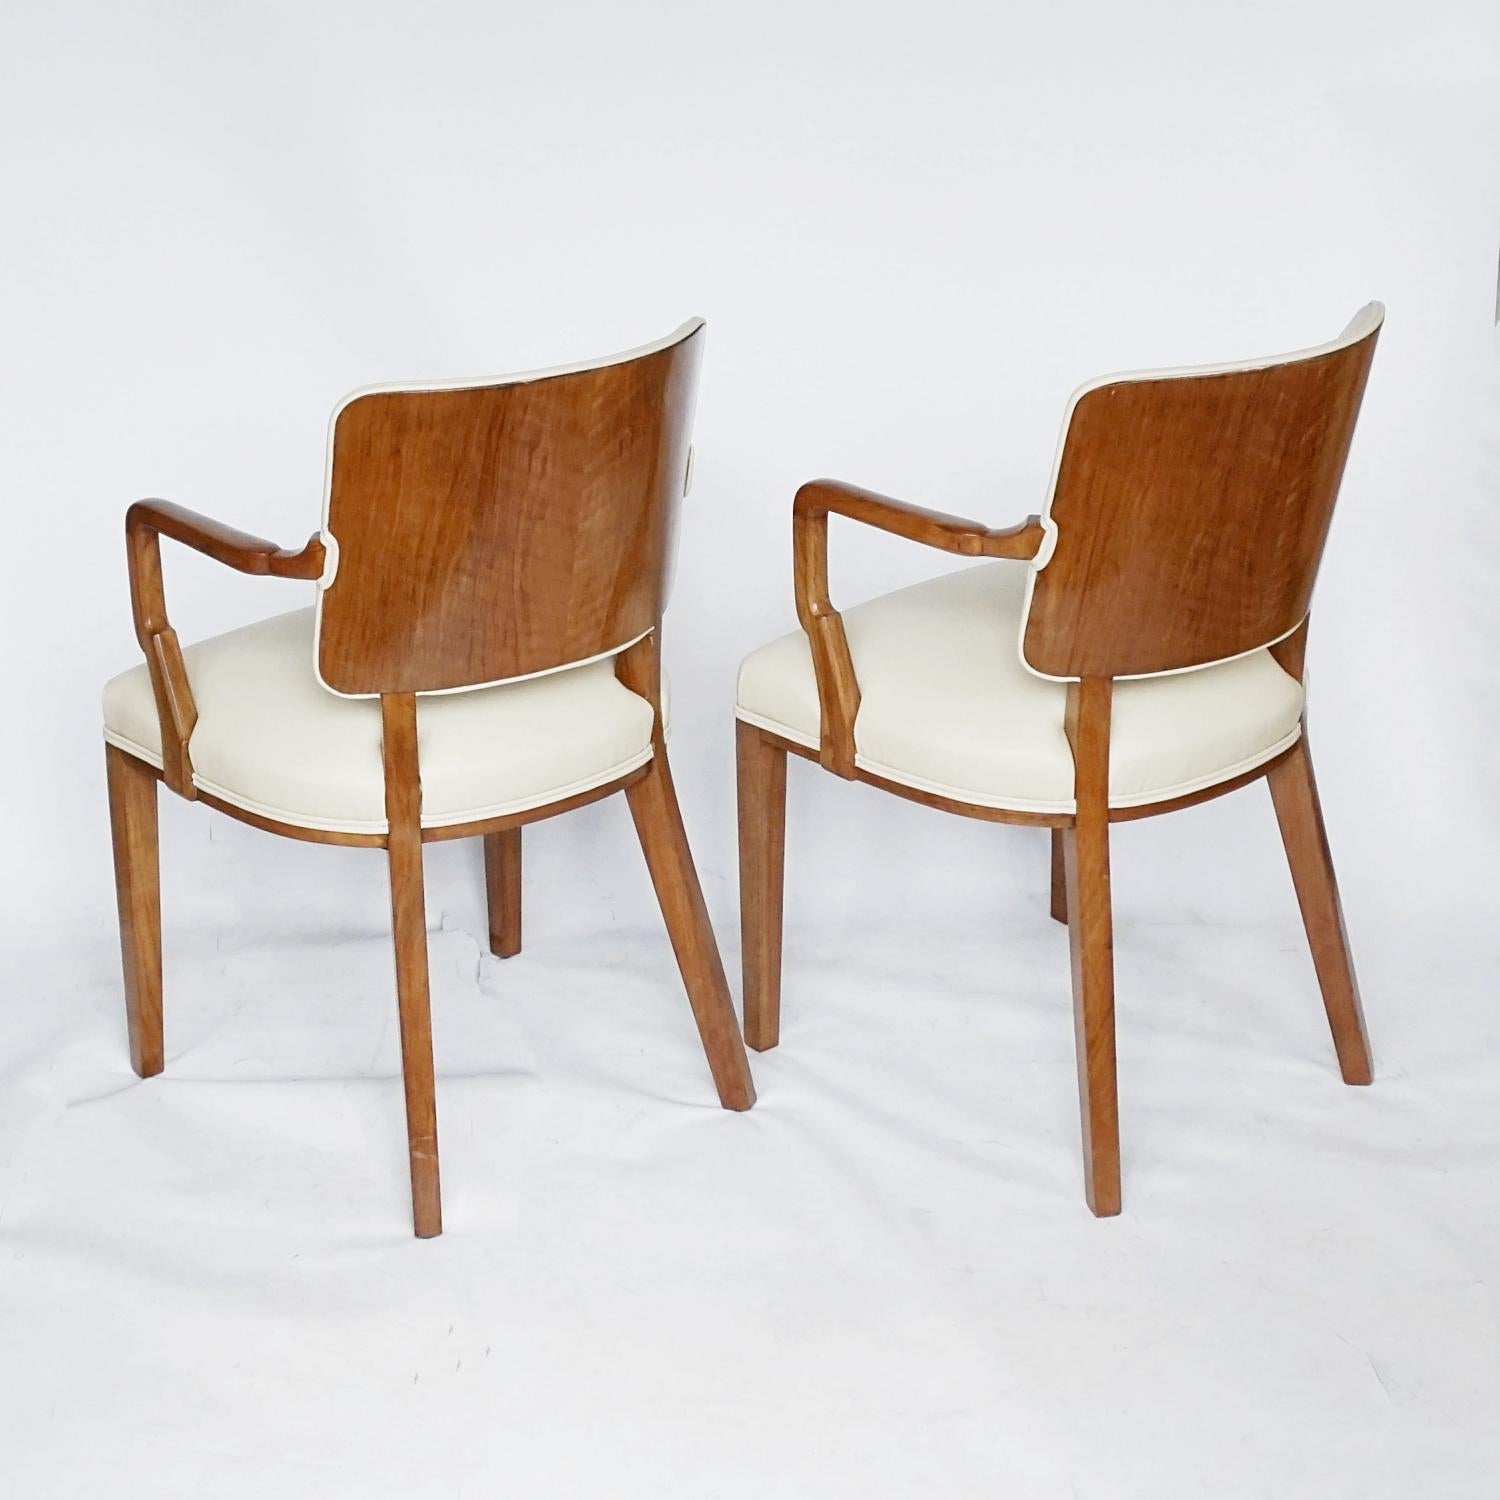 Pair of Art Deco Desk Chairs by Heal's of London Circa 1935 English 3